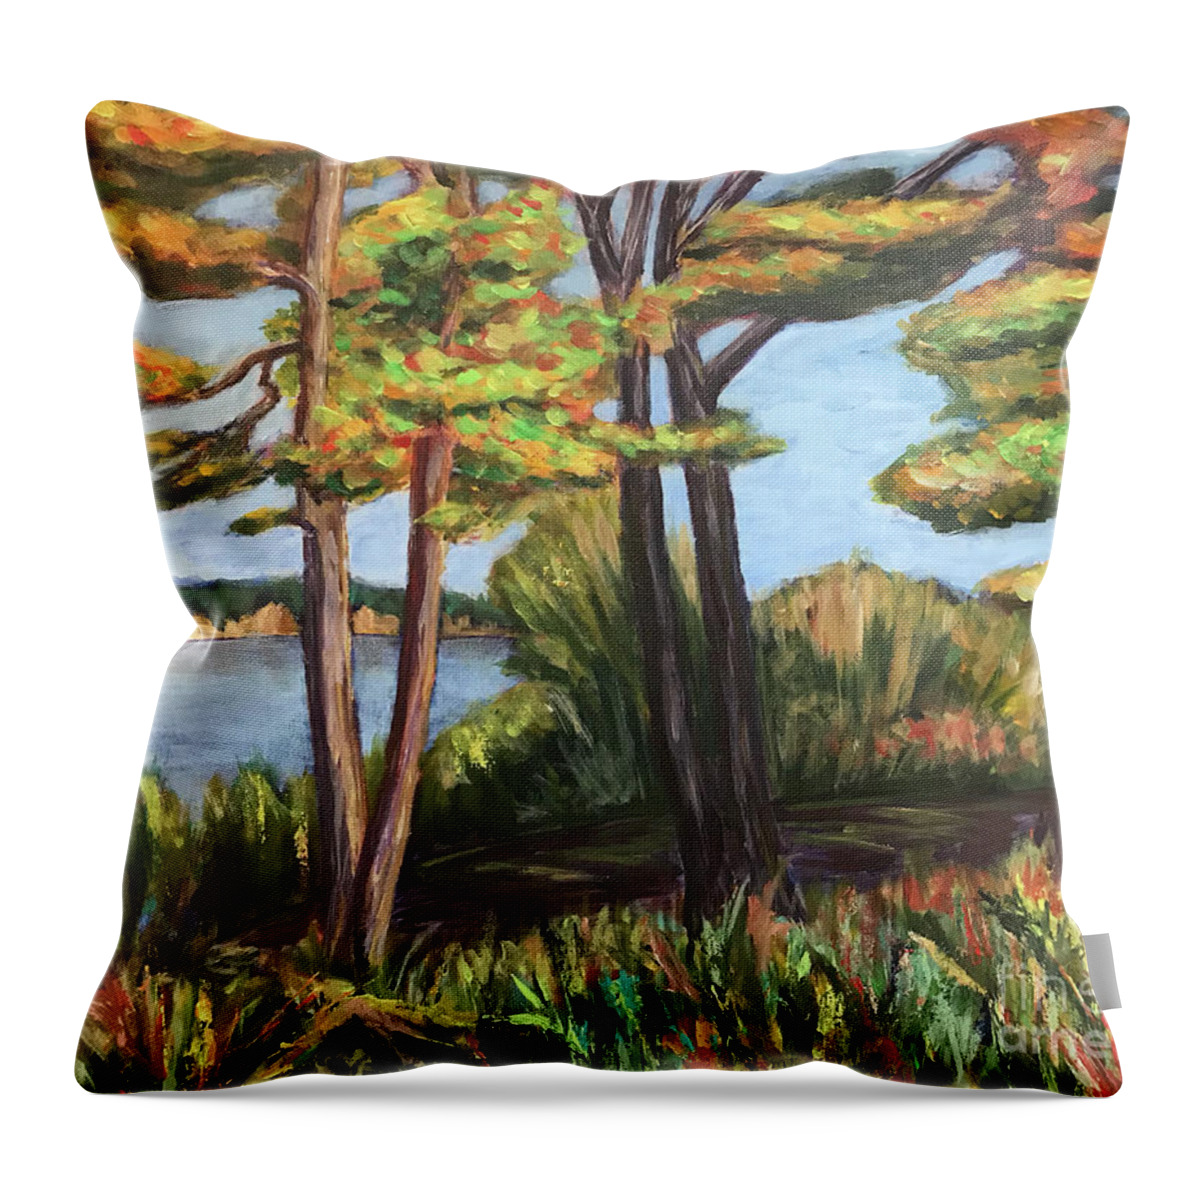 Autumn Throw Pillow featuring the painting Walk At Lake Wilcox by Christine Chin-Fook